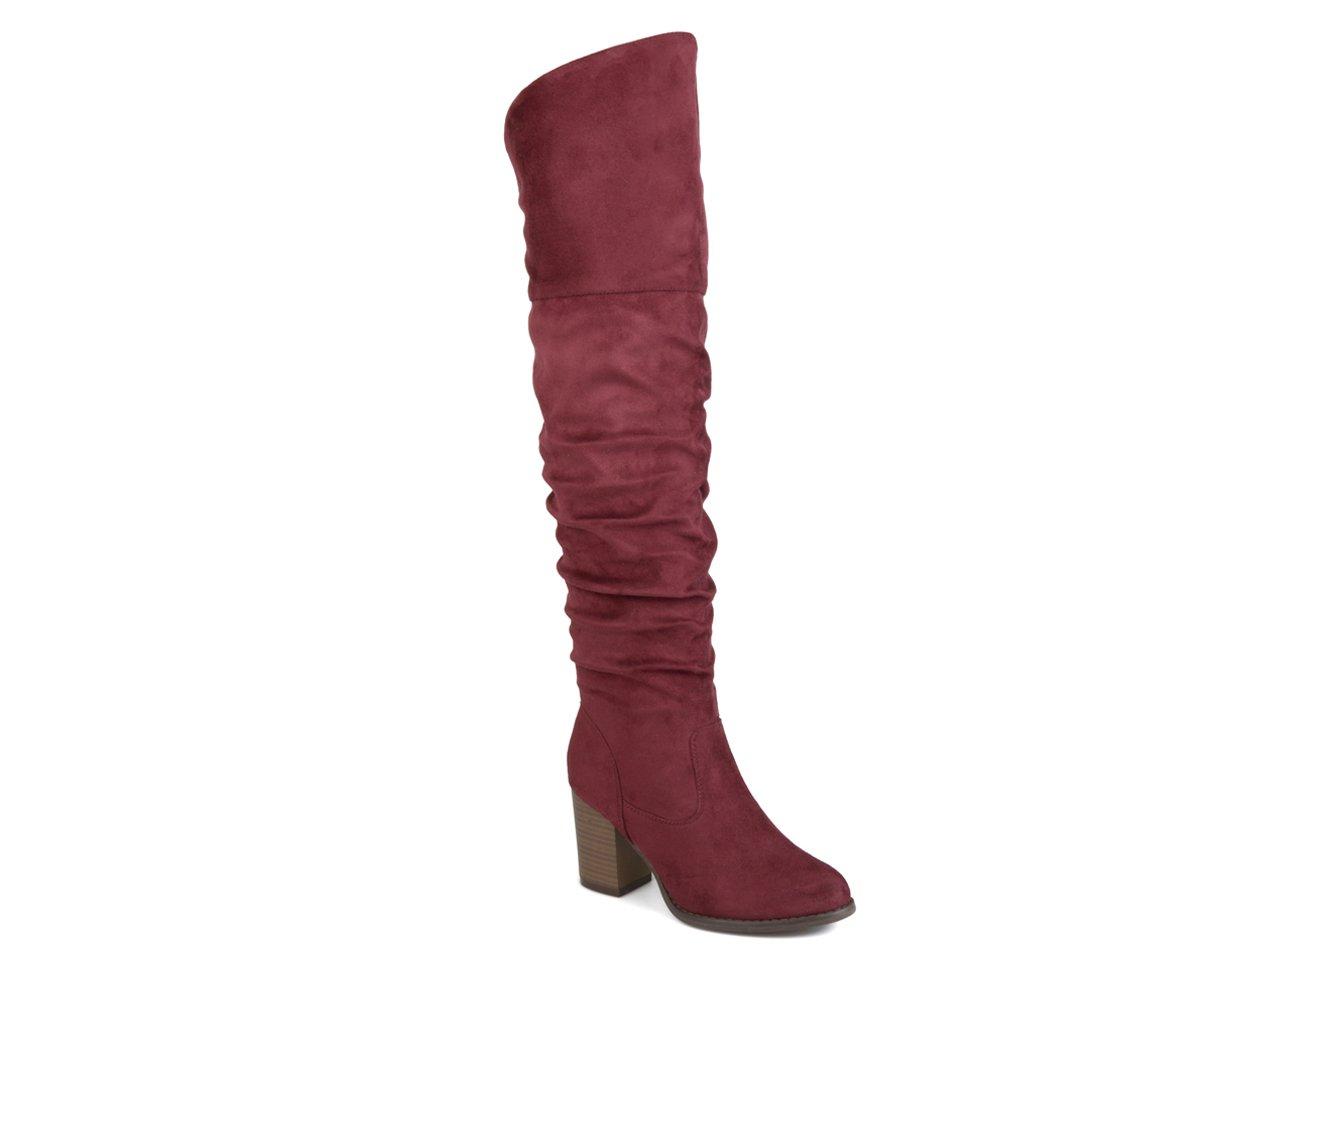 Women's Journee Collection Kaison Wide Calf Over-The-Knee Boots